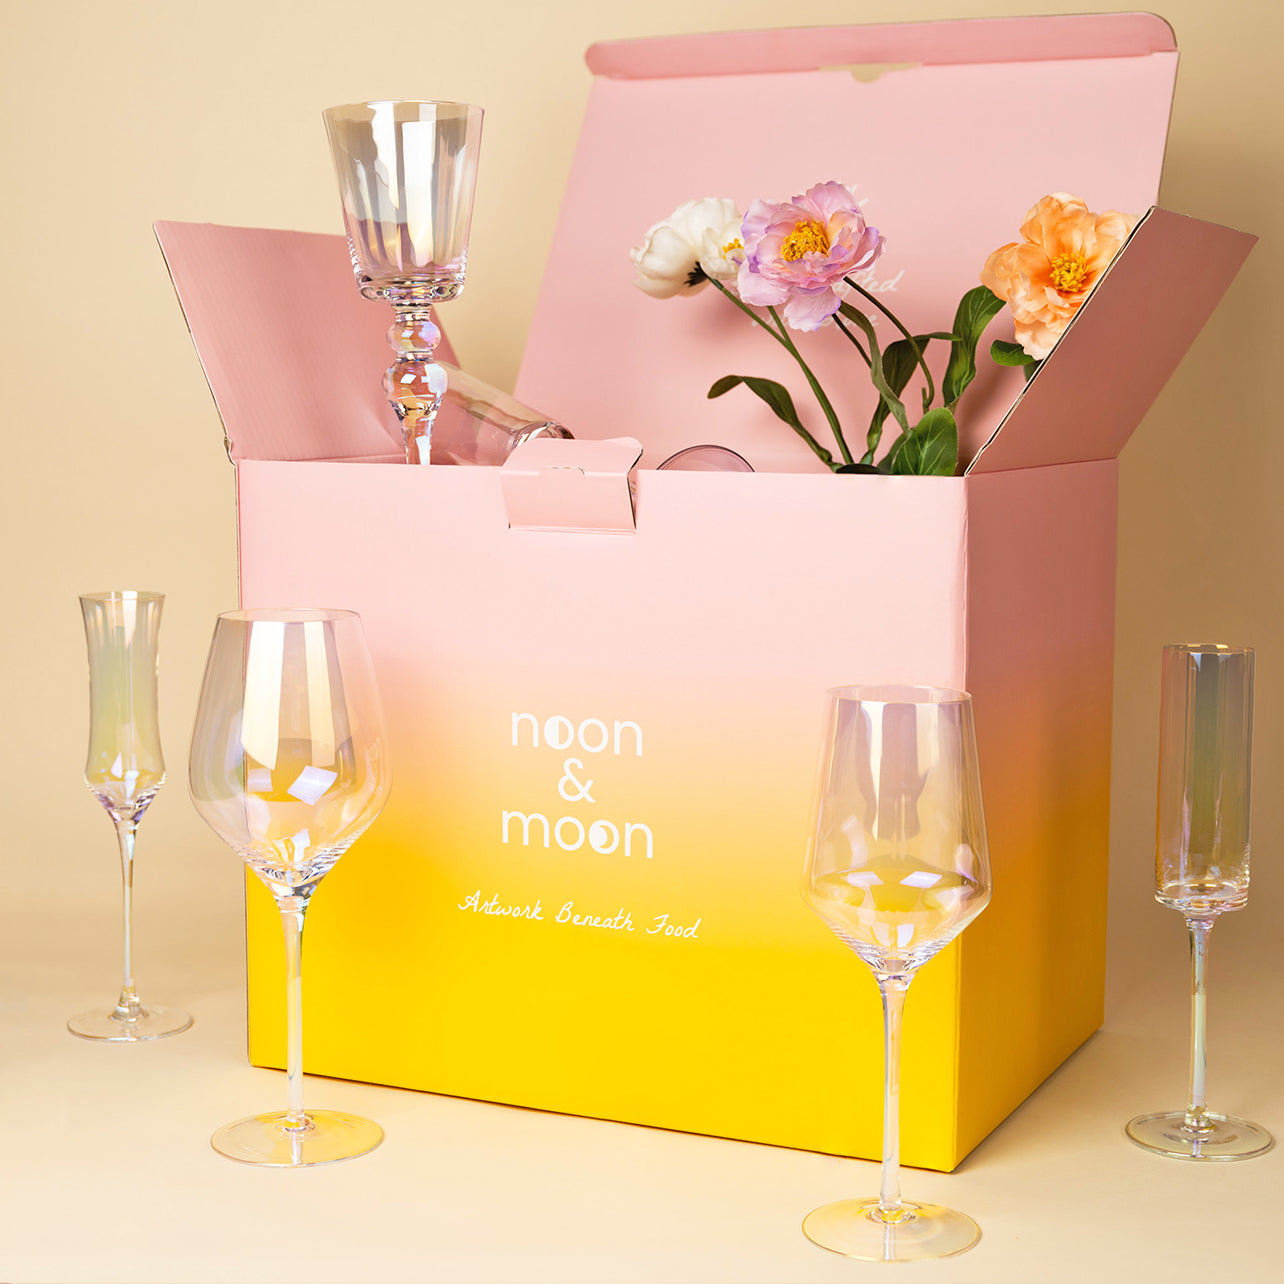 Gift Ideas: Raise a Toast to Special Occasions